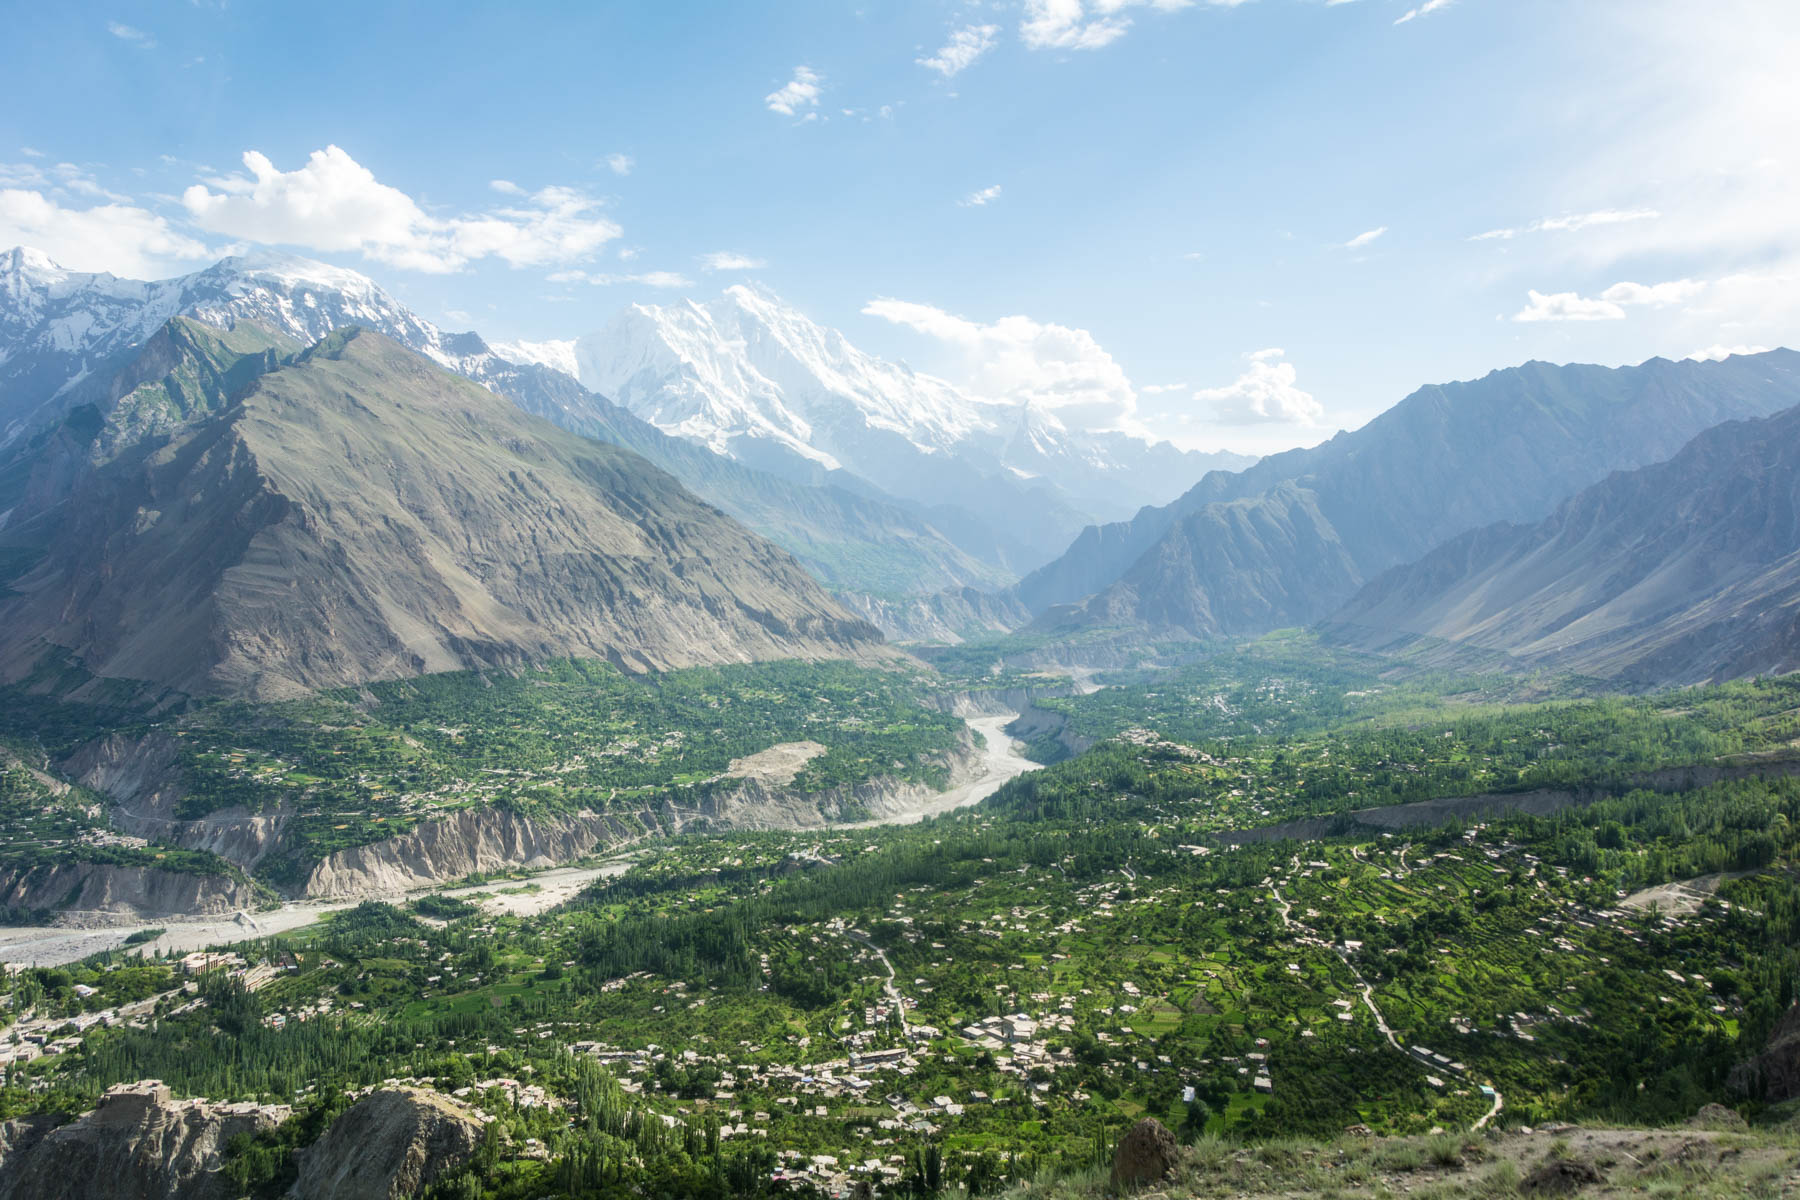 Pakistan bucket list - Hunza Valley from Karimabad - Lost With Purpose travel blog